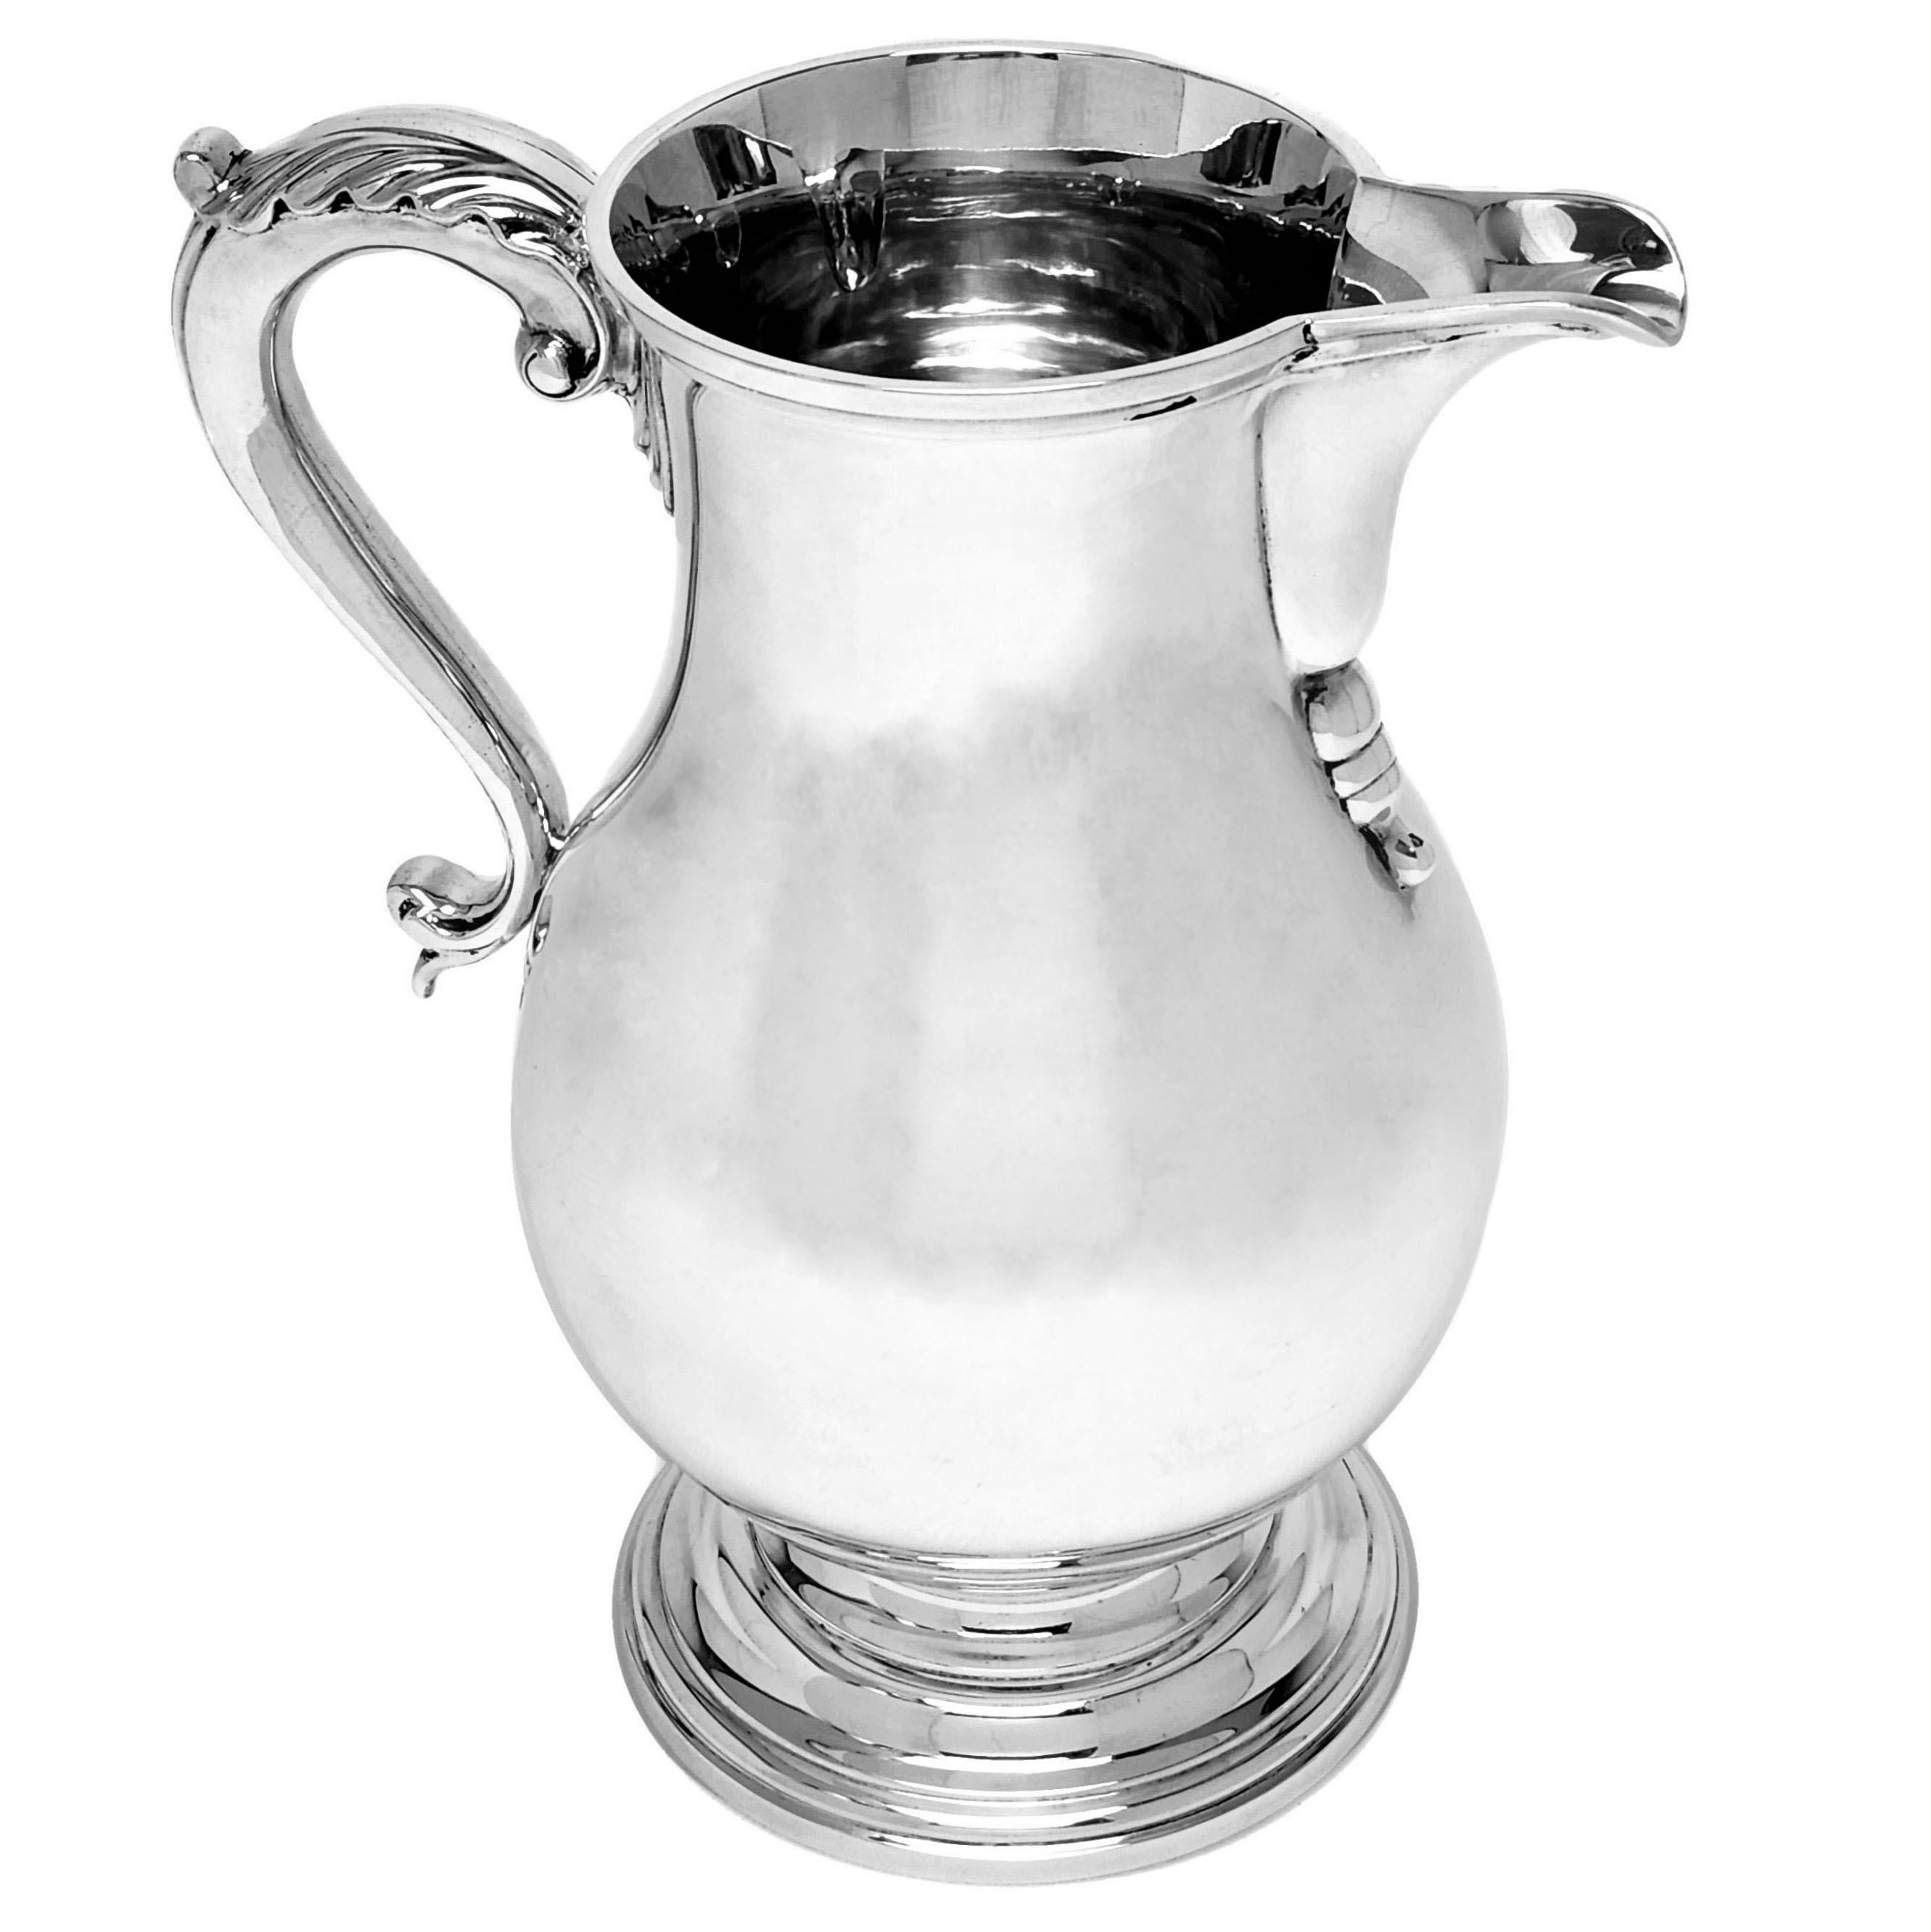 A impressive Tiffany & Co Solid Silver Pitcher Jug in the simple, elegant style of a 18th century Georgian Beer Jug. The Jug has a baluster shaped body on a stepped pedestal foot with an acanthus leaf topped scroll handle. Of substantial size, this